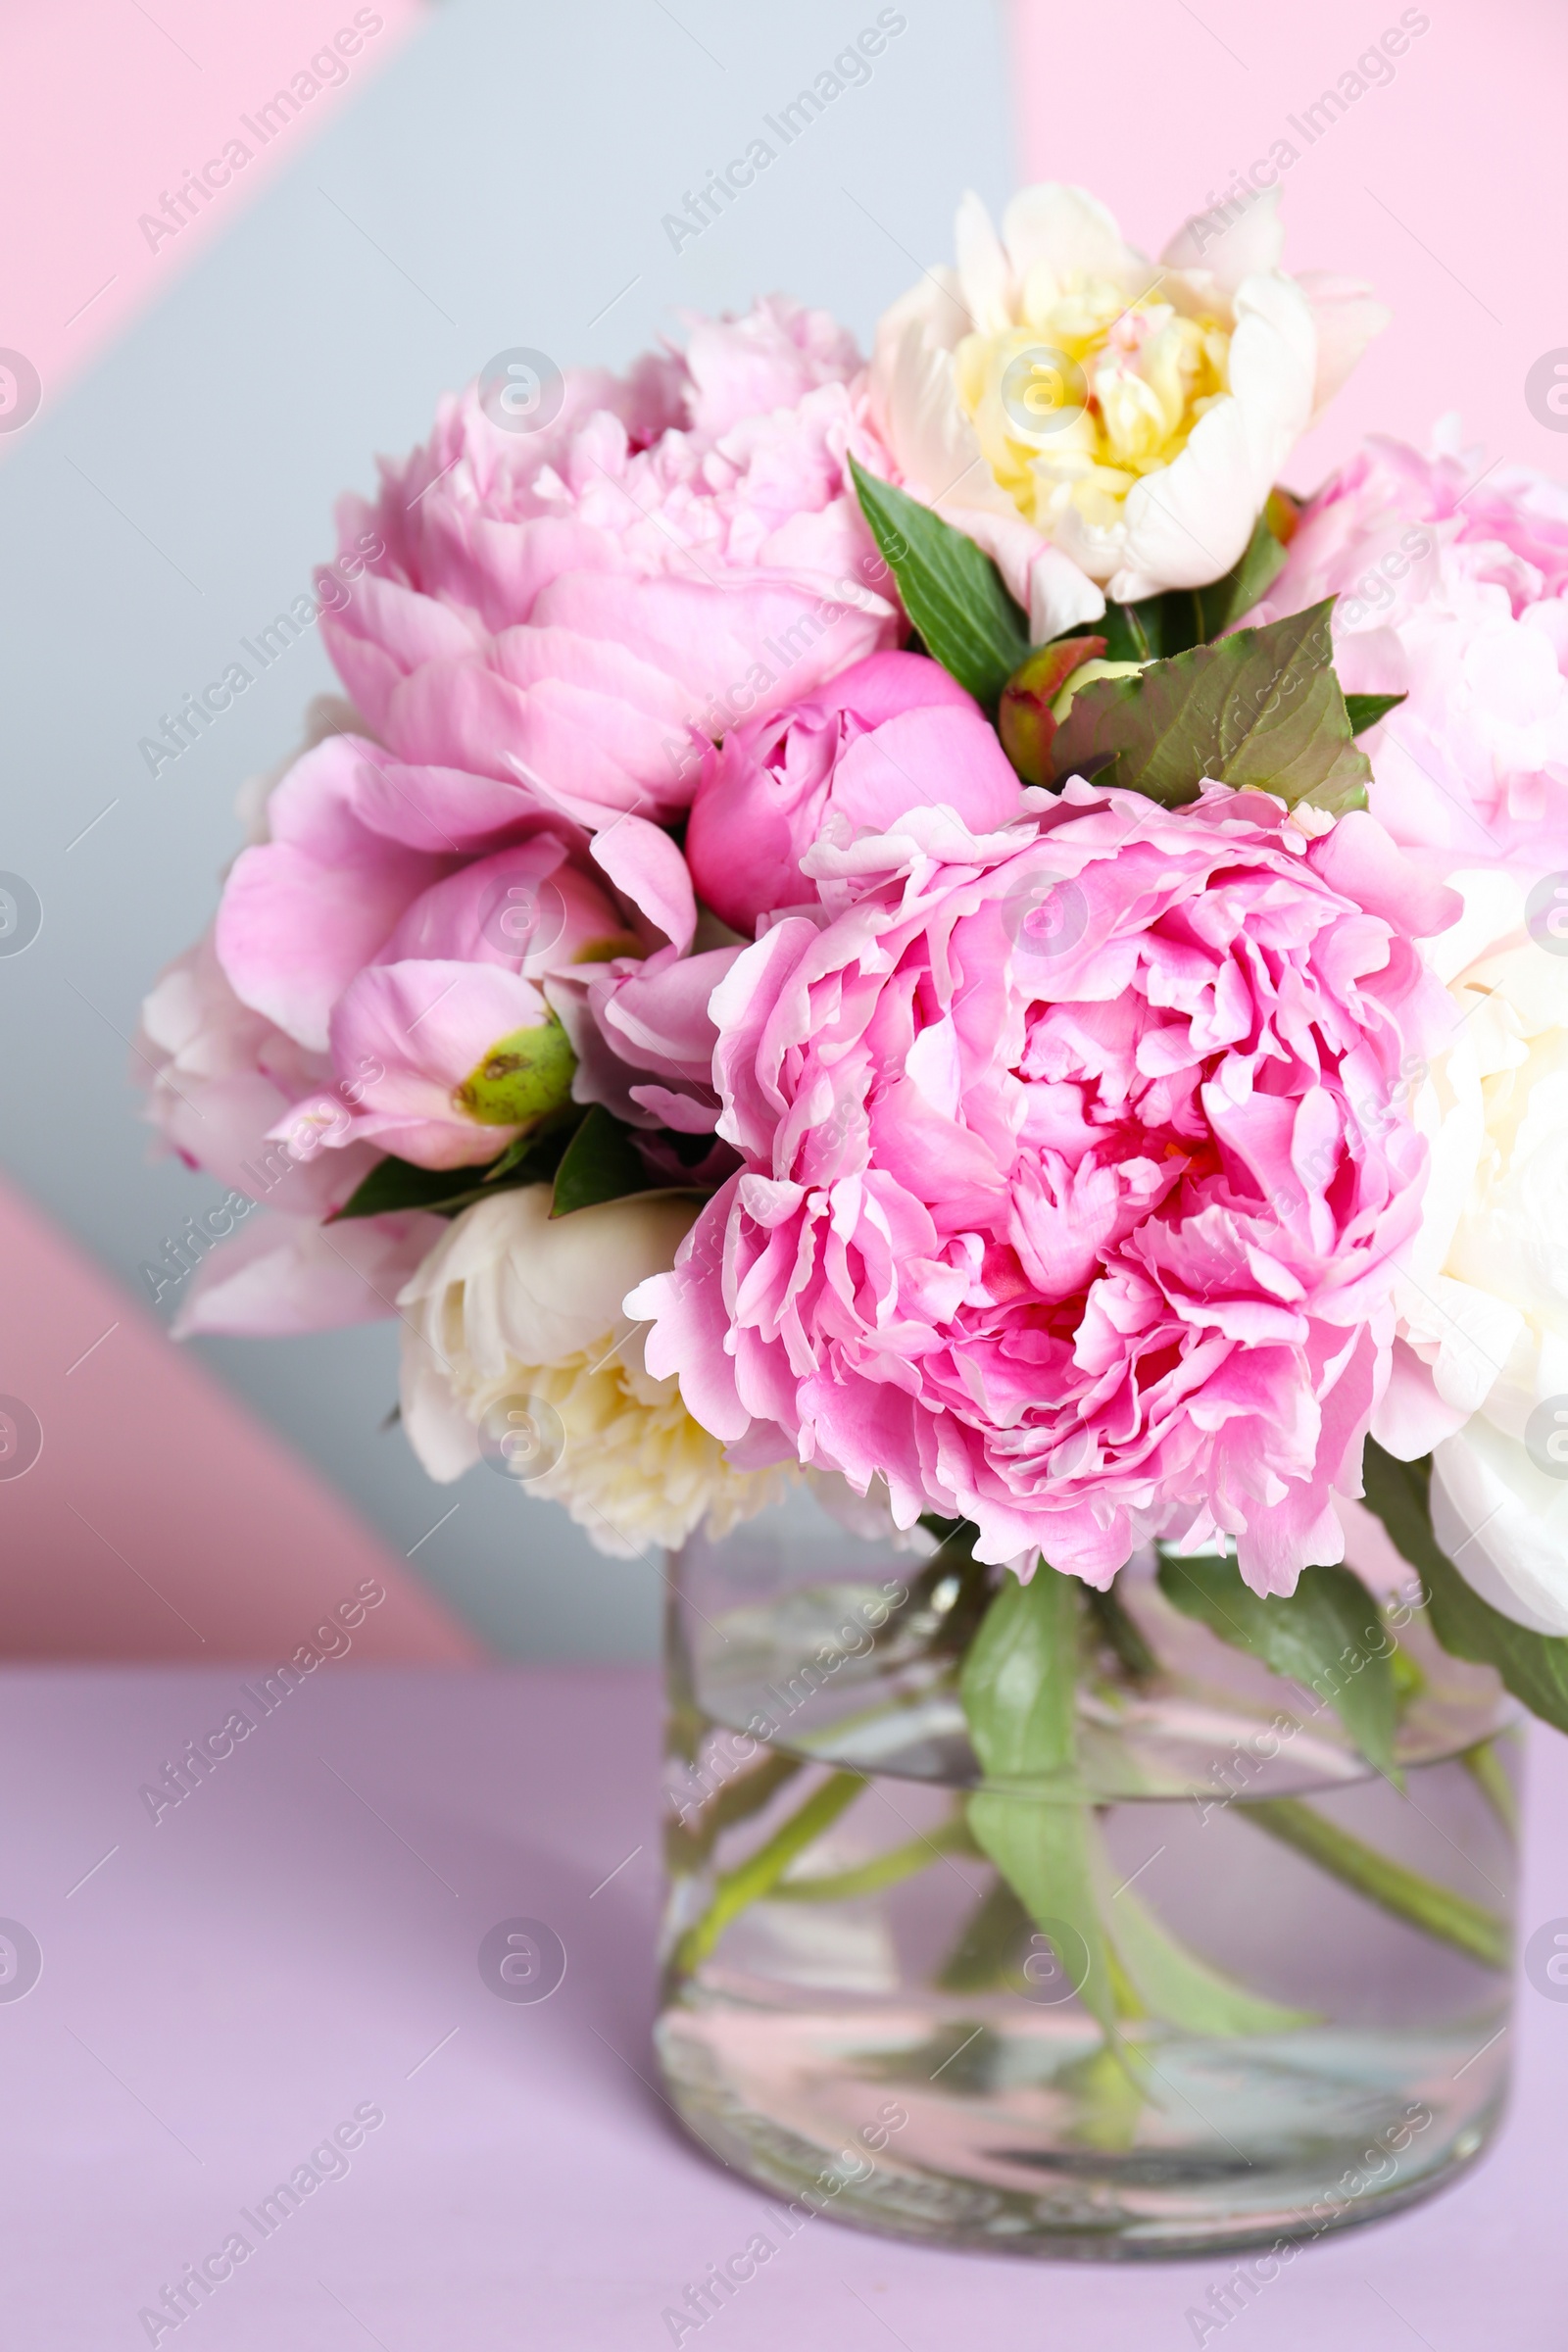 Photo of Bouquet of beautiful peonies in vase on lilac table